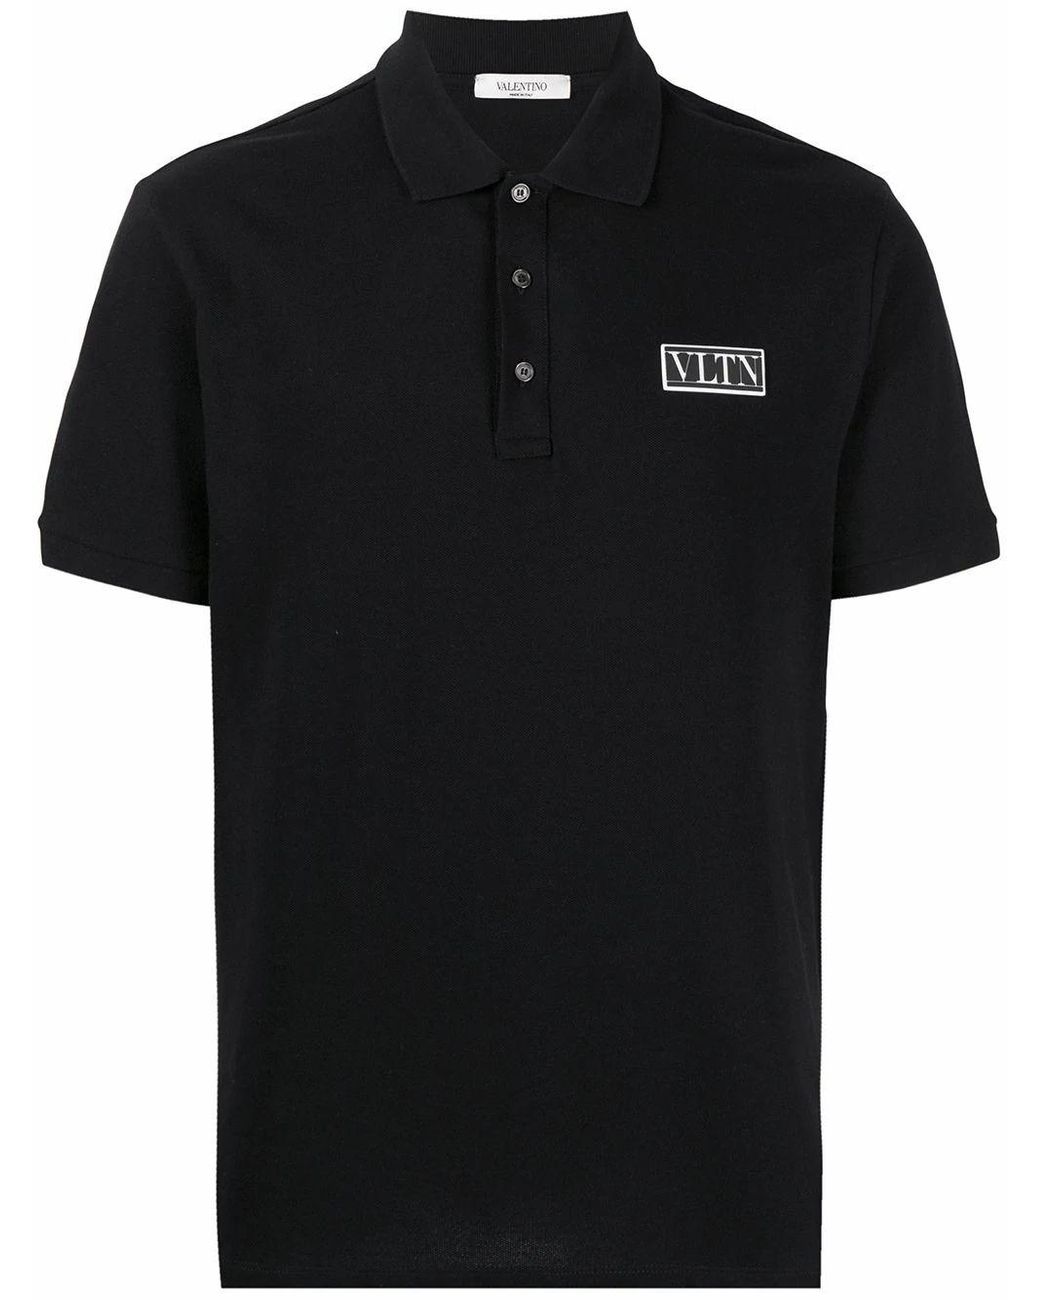 Valentino Cotton Polo Shirt in Black for Men - Lyst